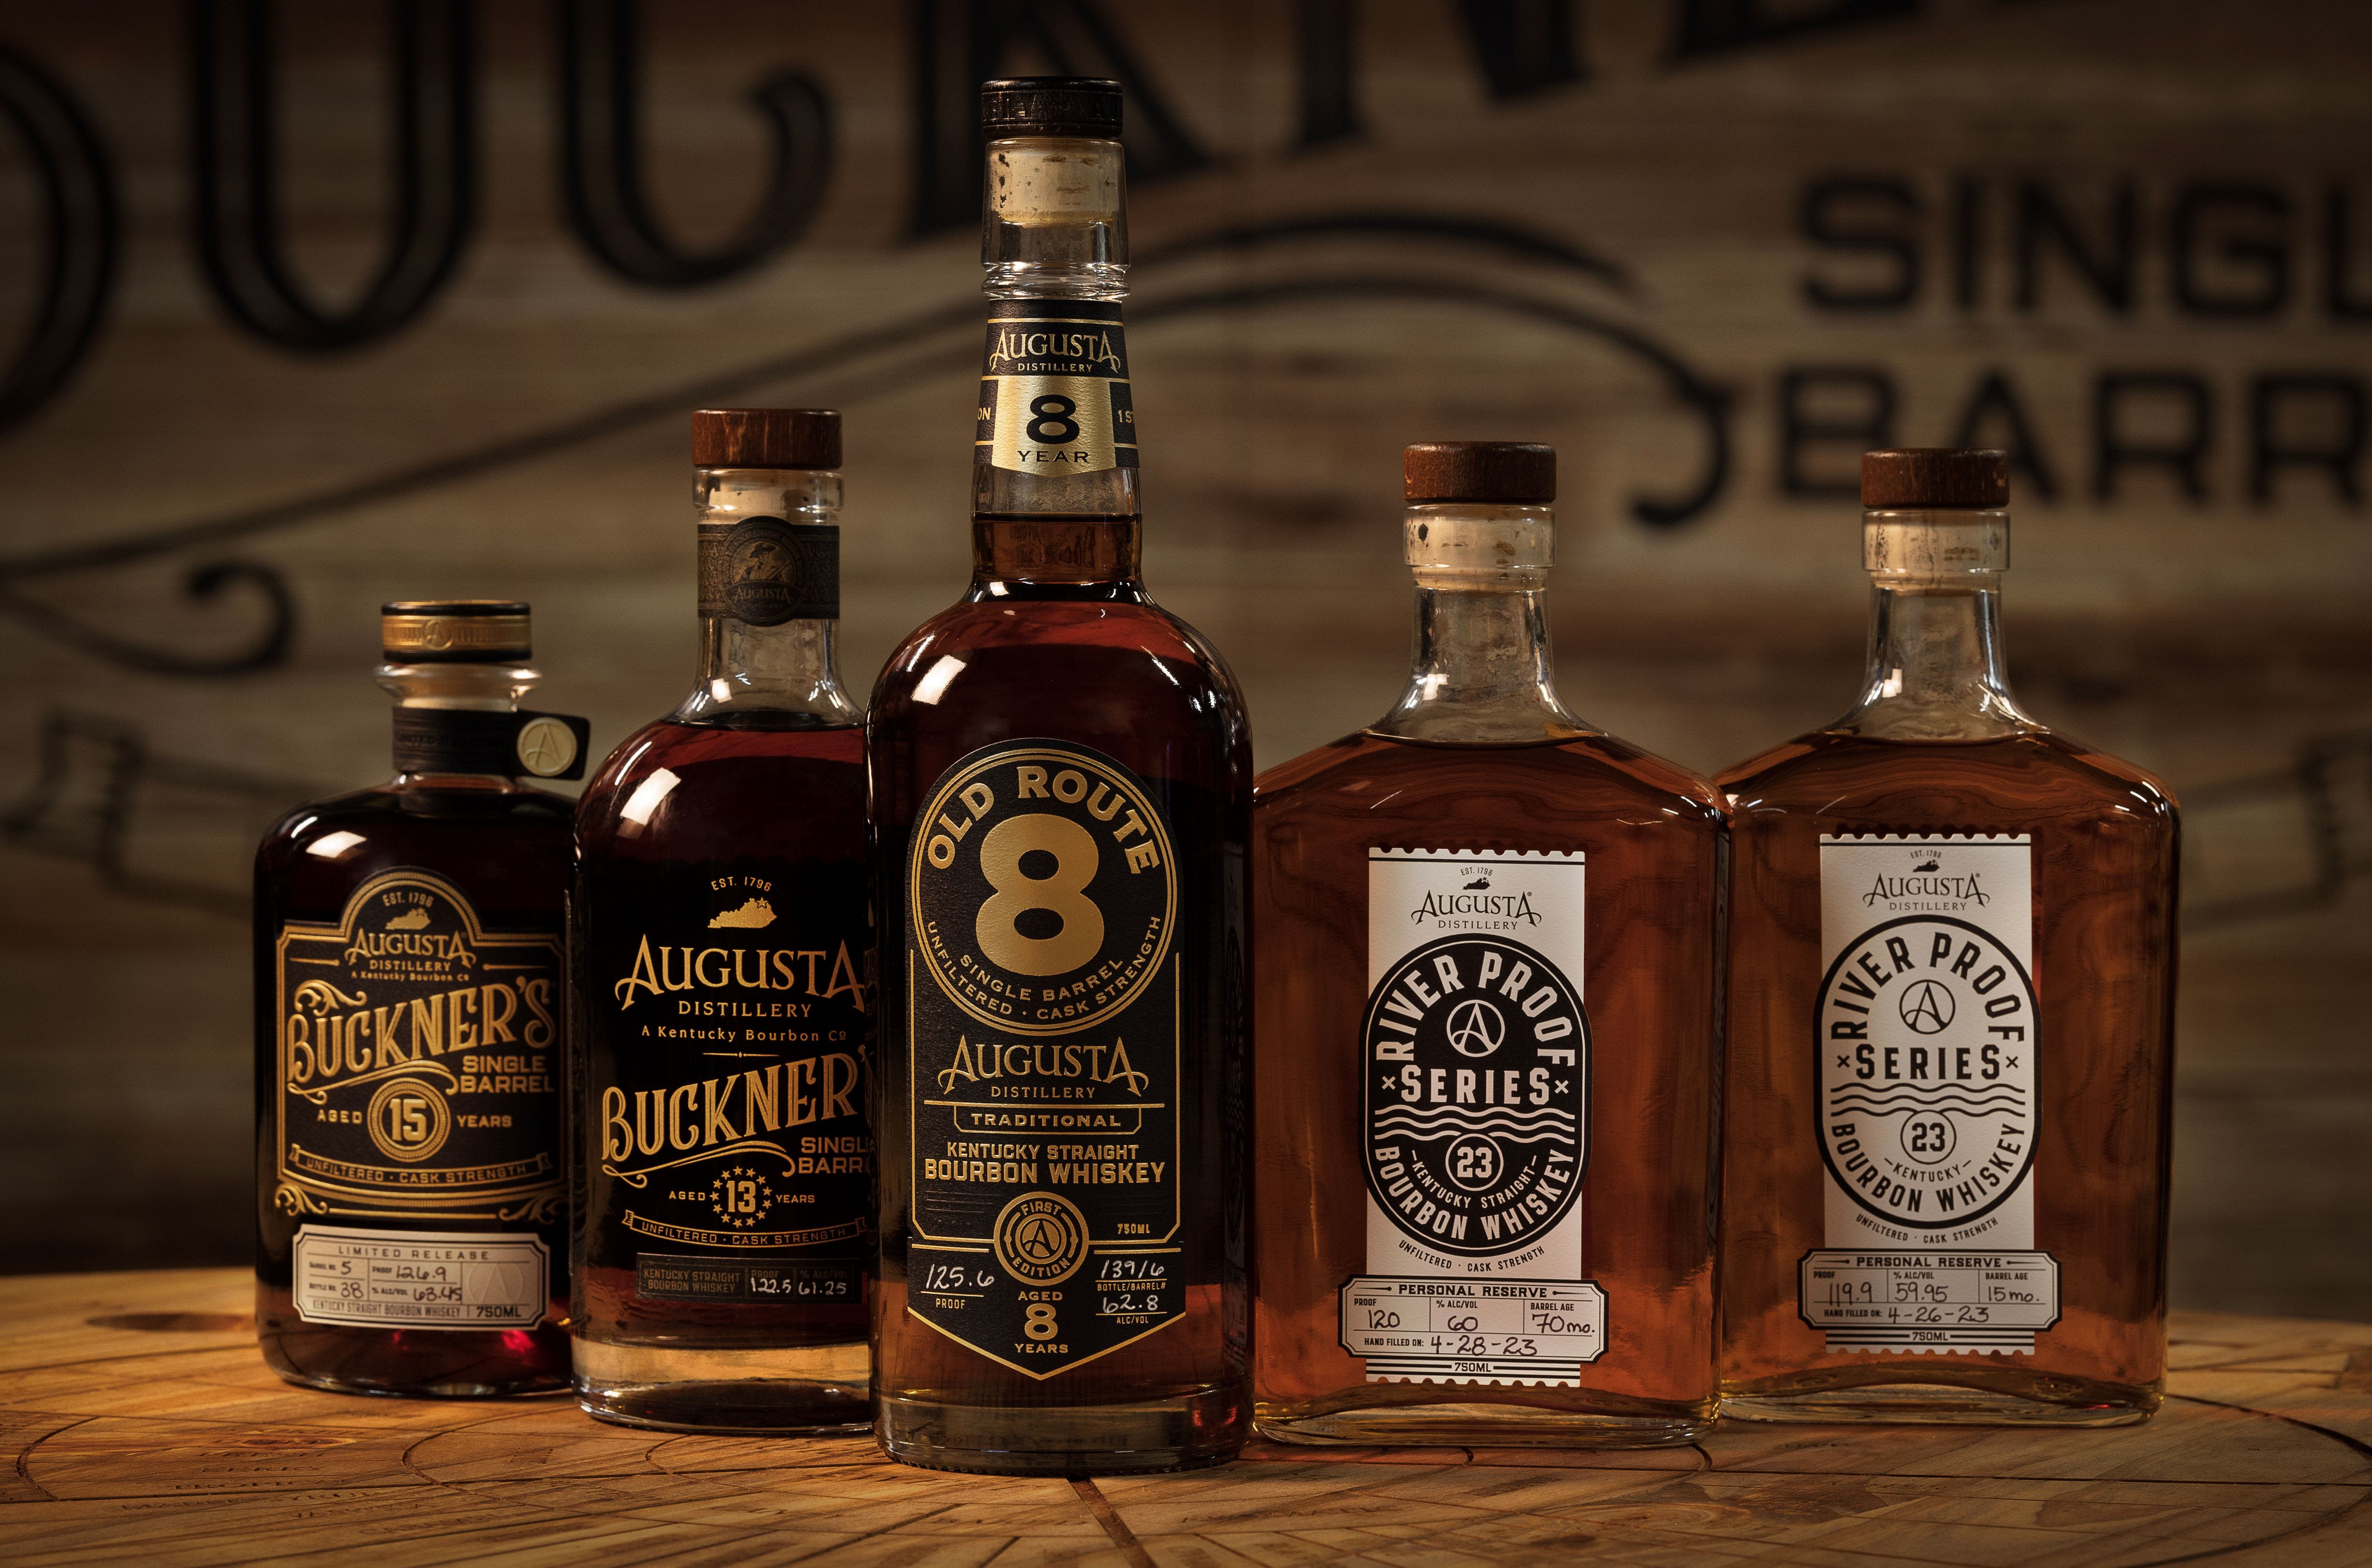 Here are 5 new bourbon releases or experiences you need to know about this month